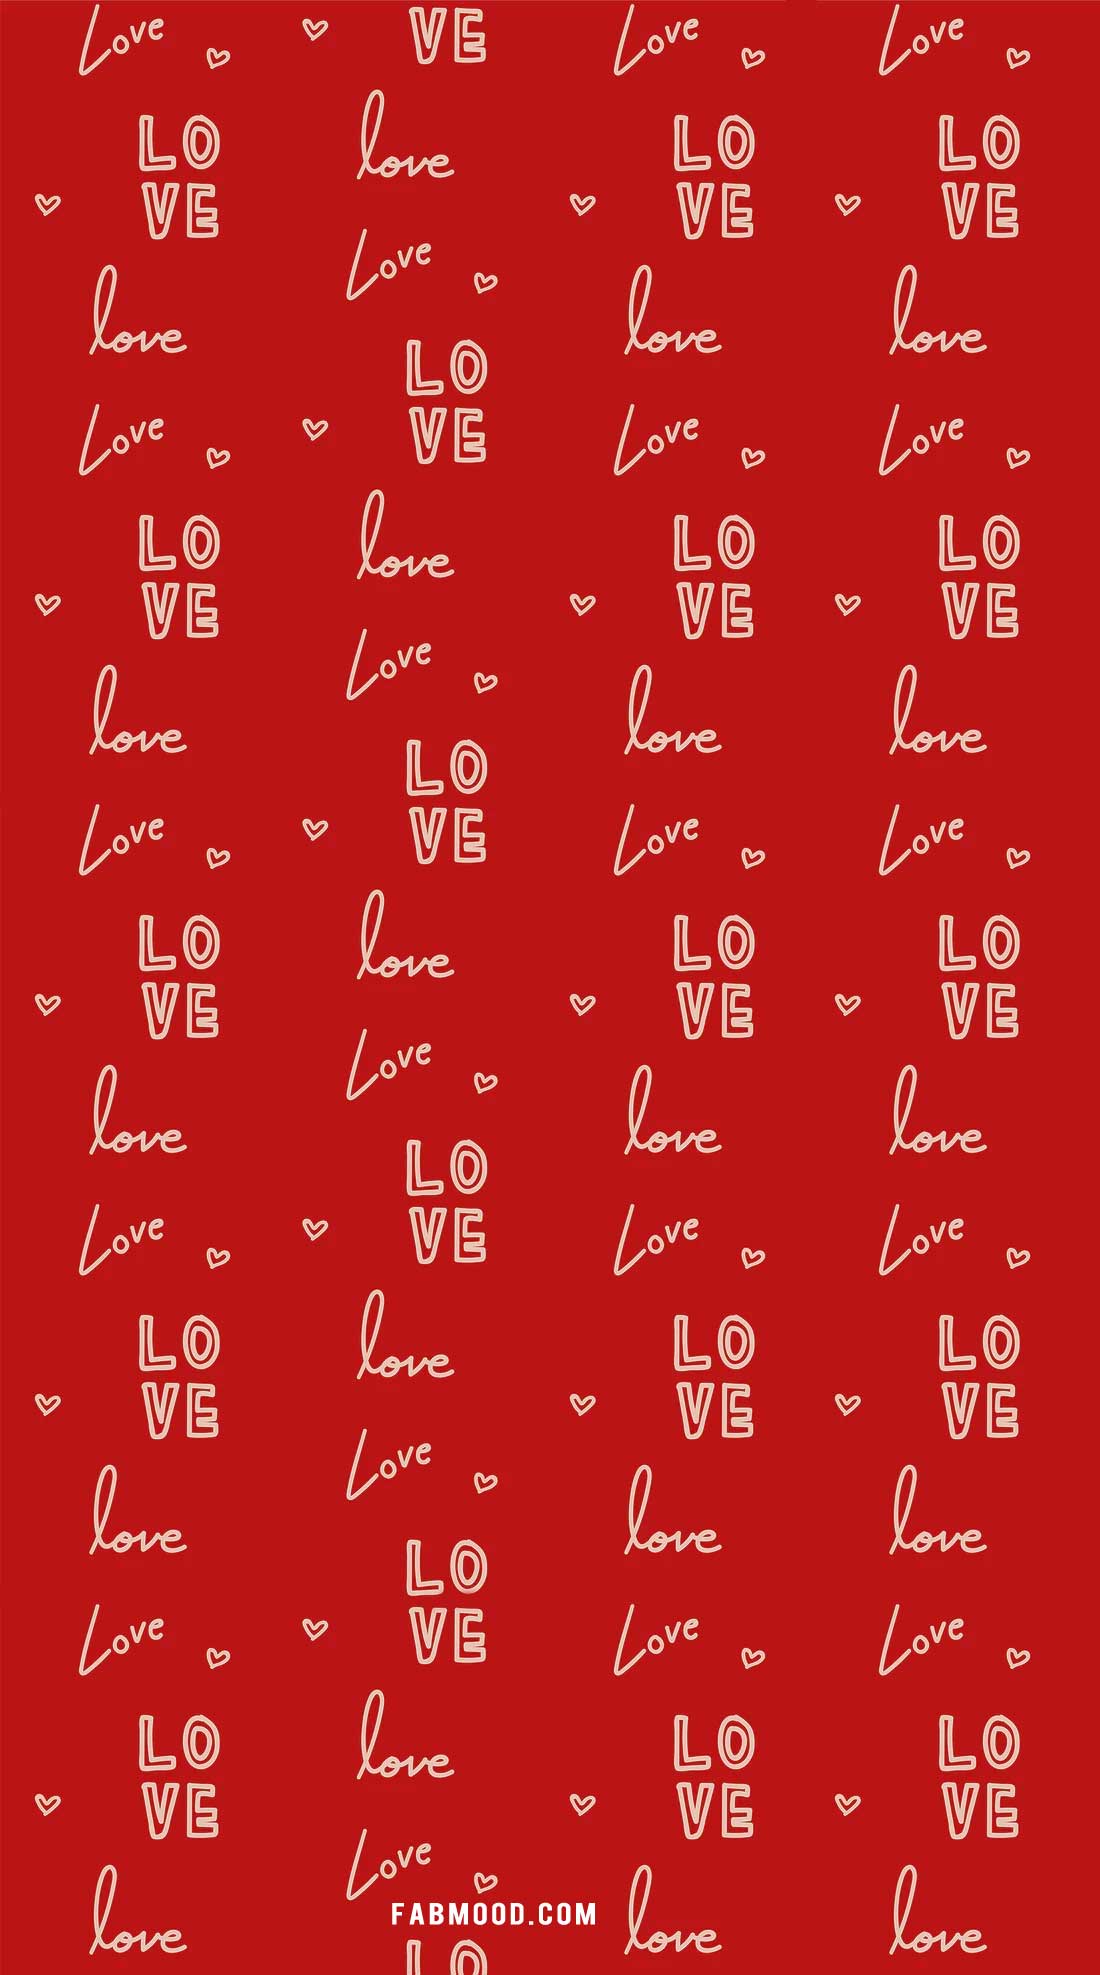 red valentine's day wallpaper iphone, aesthetic valentine's day wallpaper, valentines day wallpaper, valentine's day wallpaper cute, valentines wallpaper ideas, valentines wallpaper iphone, valentines wallpaper phone, aesthetic valentine wallpaper